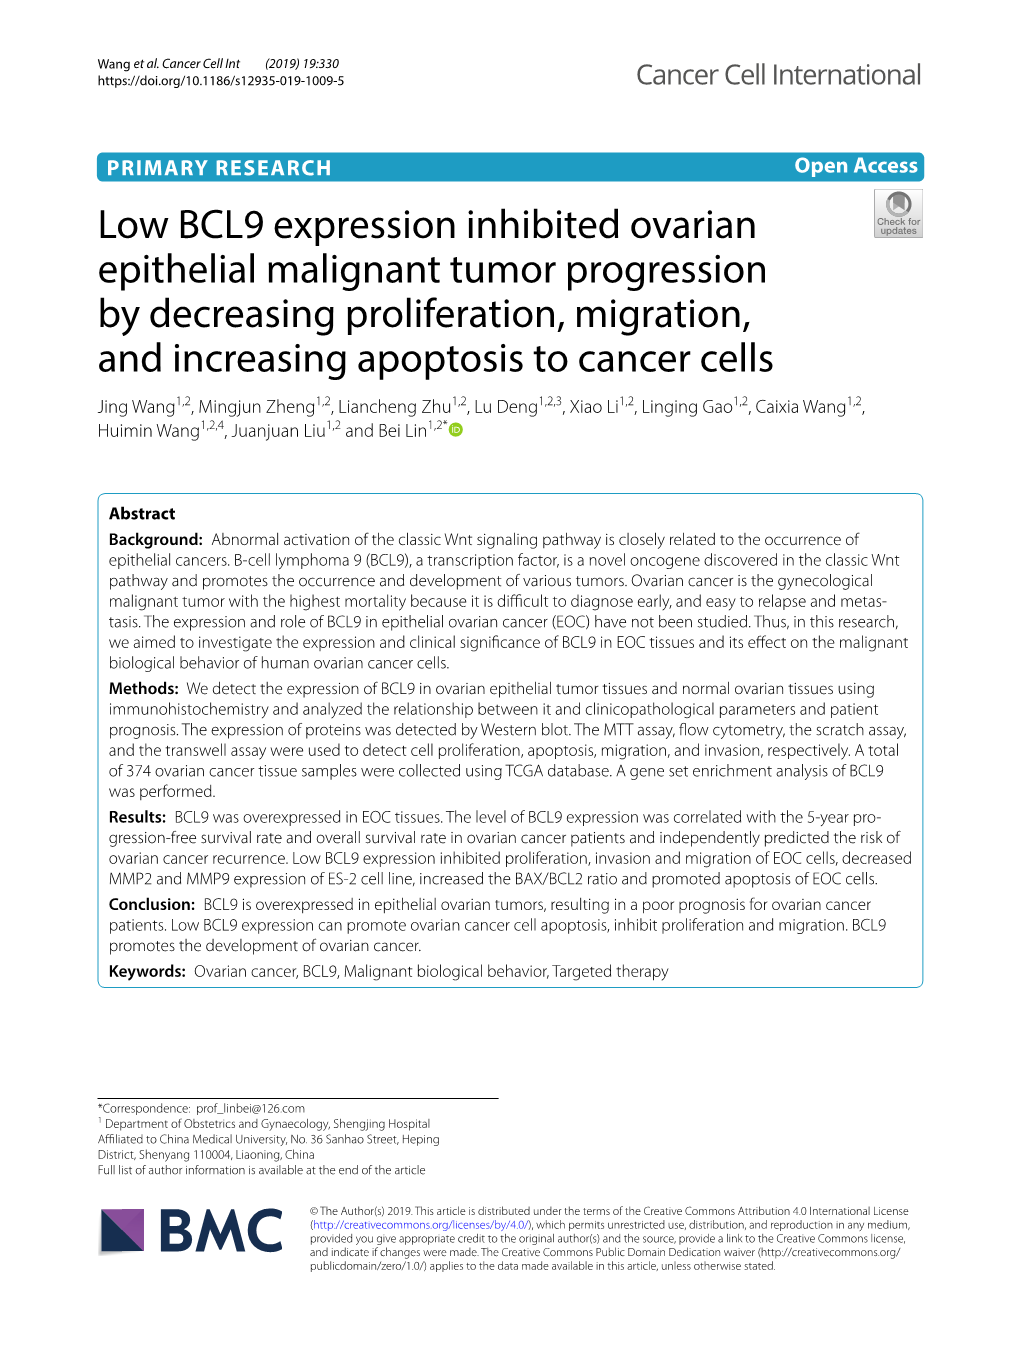 Low BCL9 Expression Inhibited Ovarian Epithelial Malignant Tumor